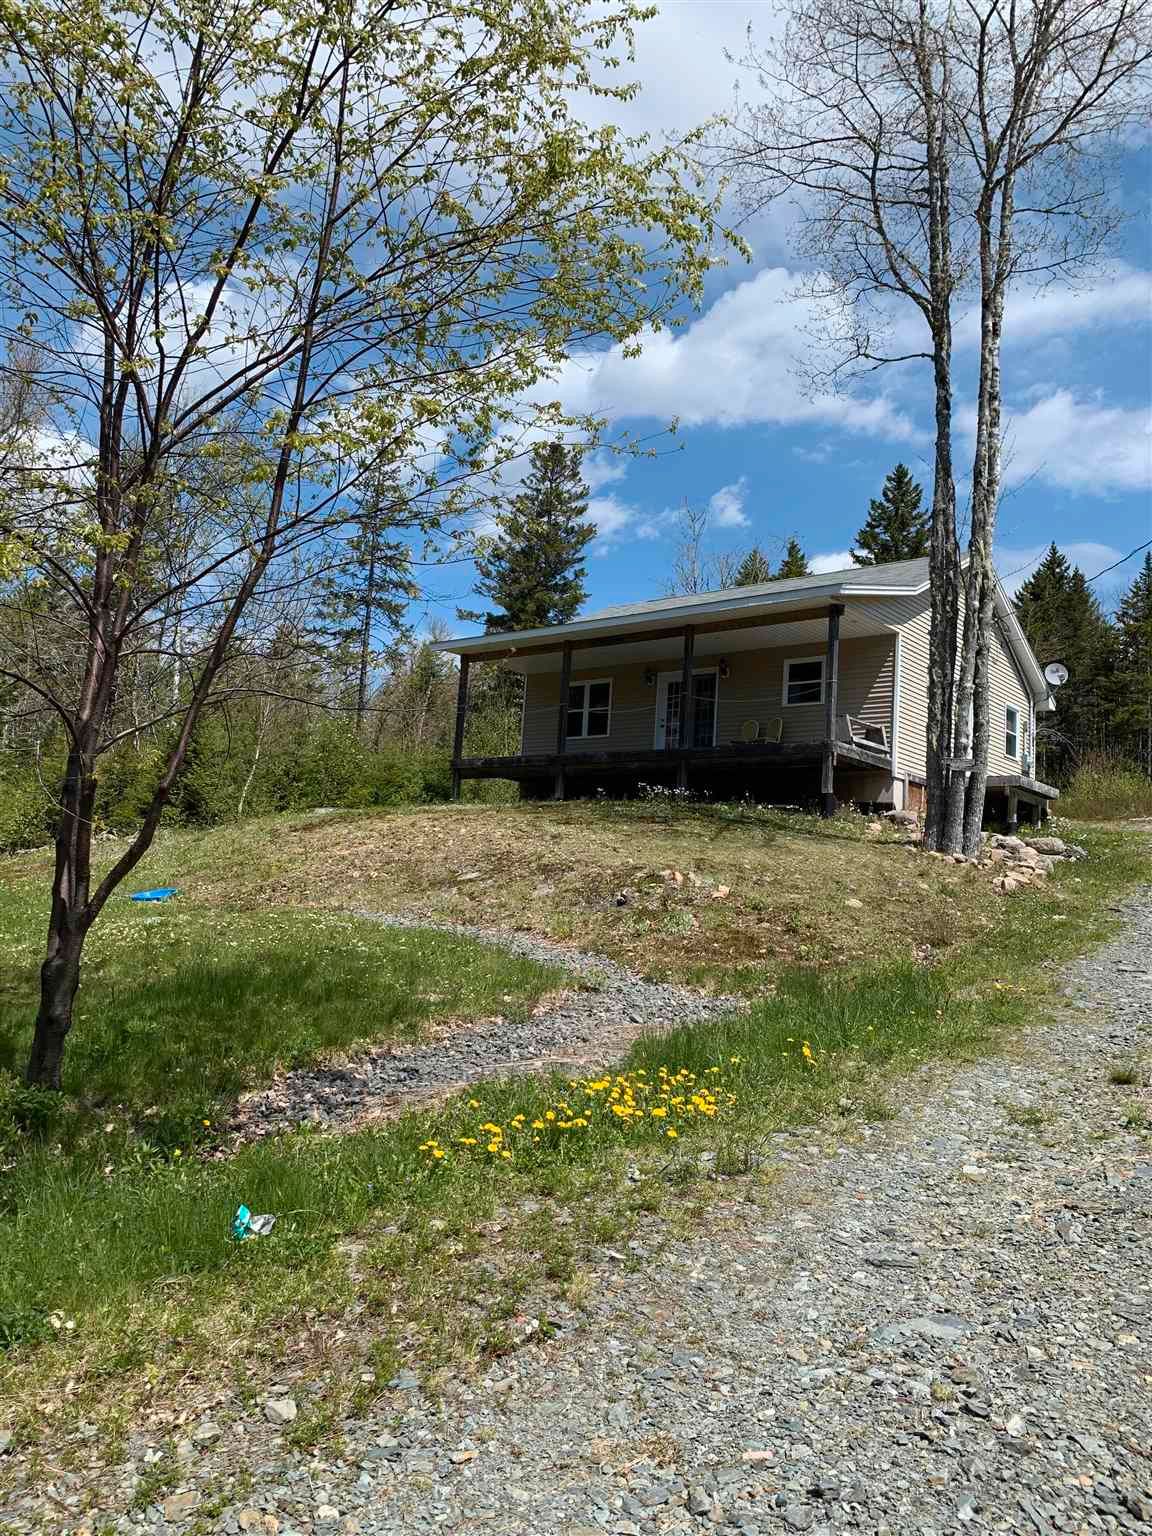 Main Photo: 276 Falkenham Road in East Dalhousie: 404-Kings County Residential for sale (Annapolis Valley)  : MLS®# 202111989